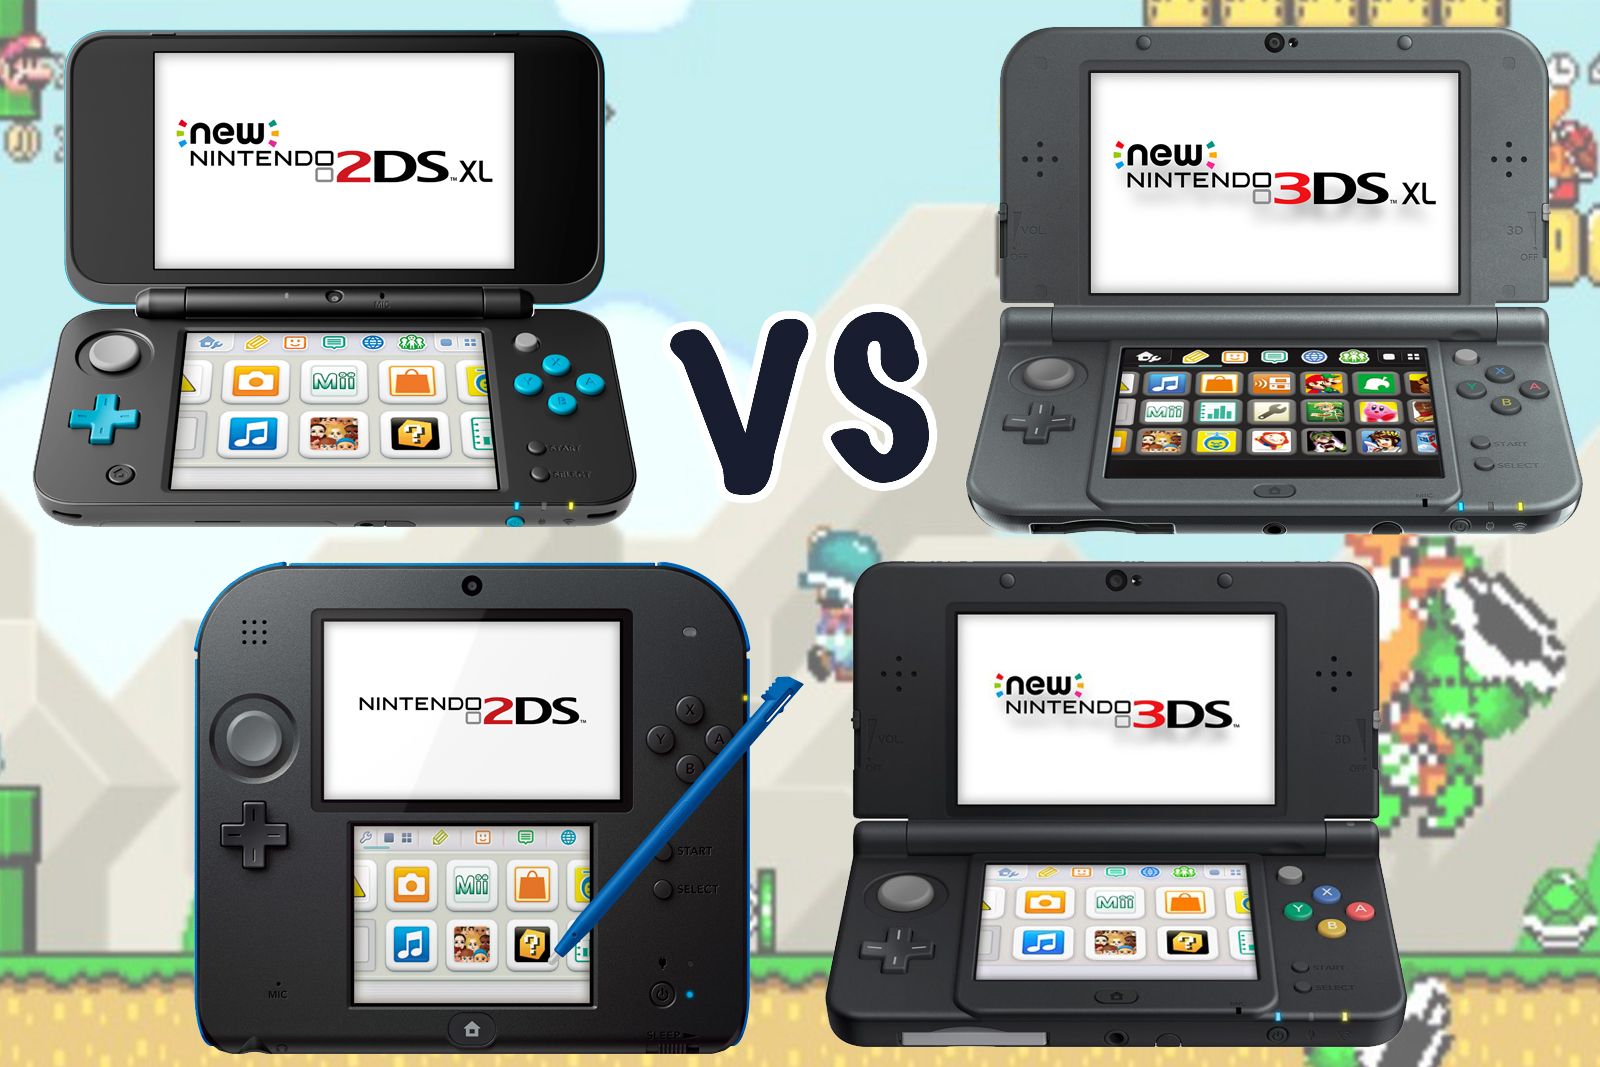 Nintendo XL vs 2DS vs 3DS 3DS What's the difference?